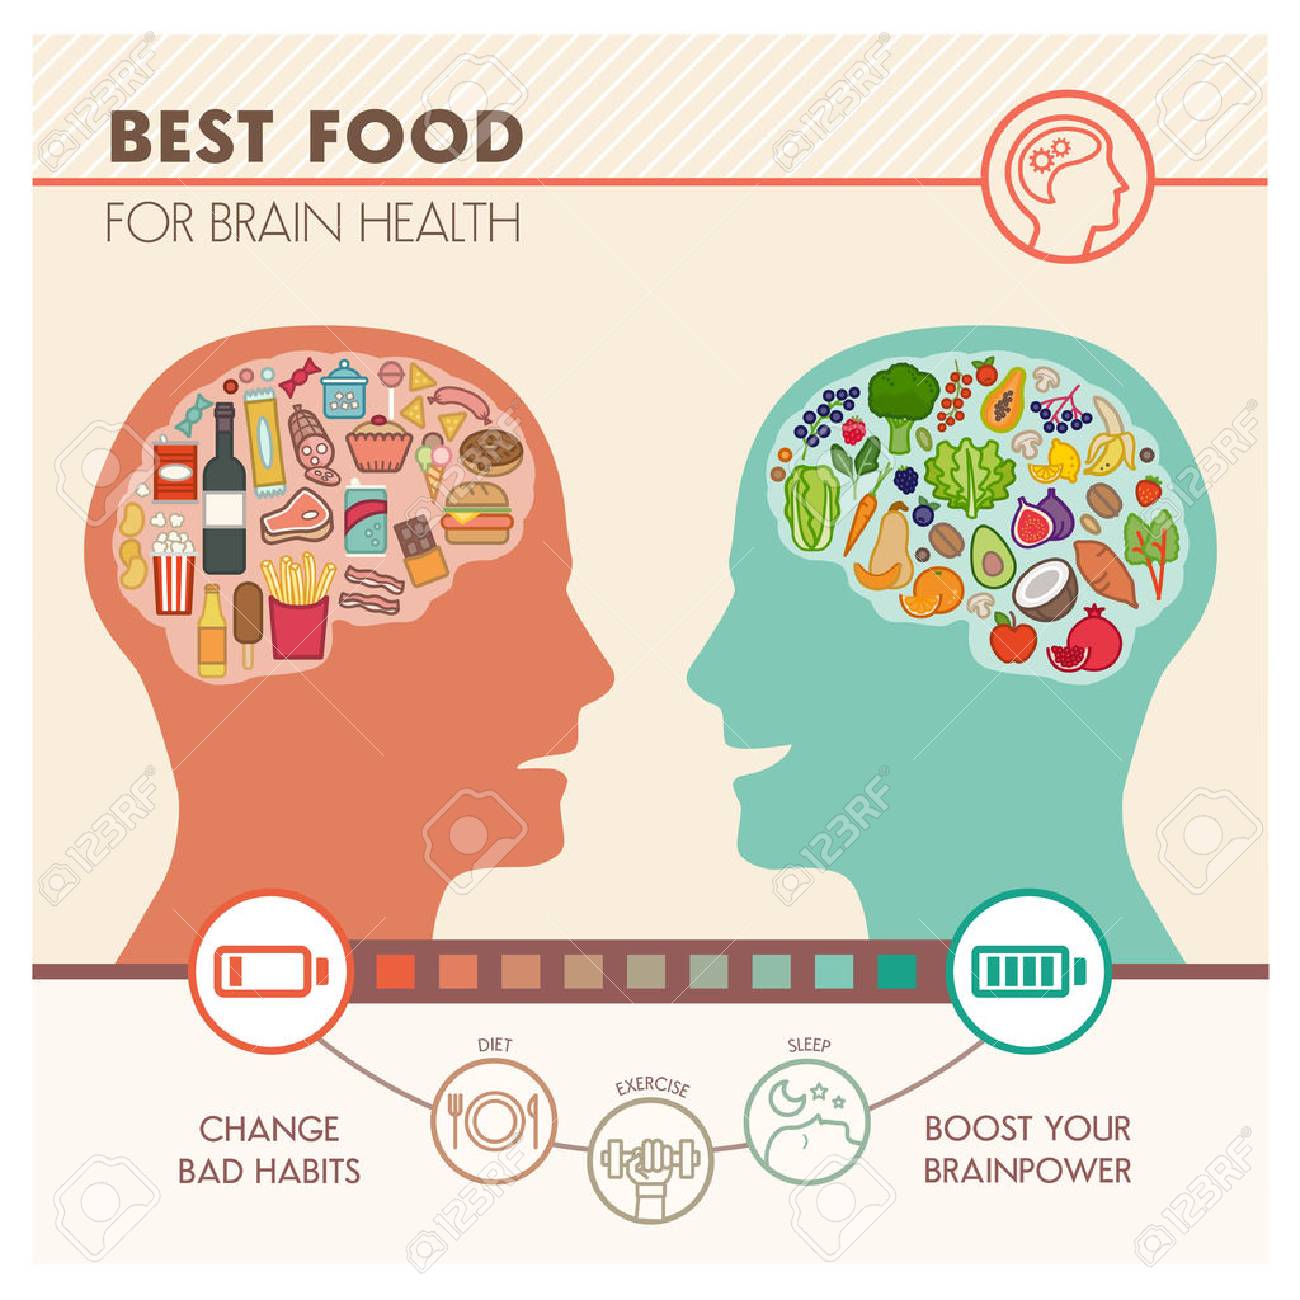 58290171-junk-unhealthy-food-and-healthy-vegetables-diet-comparison-best-food-for-brain-infographic